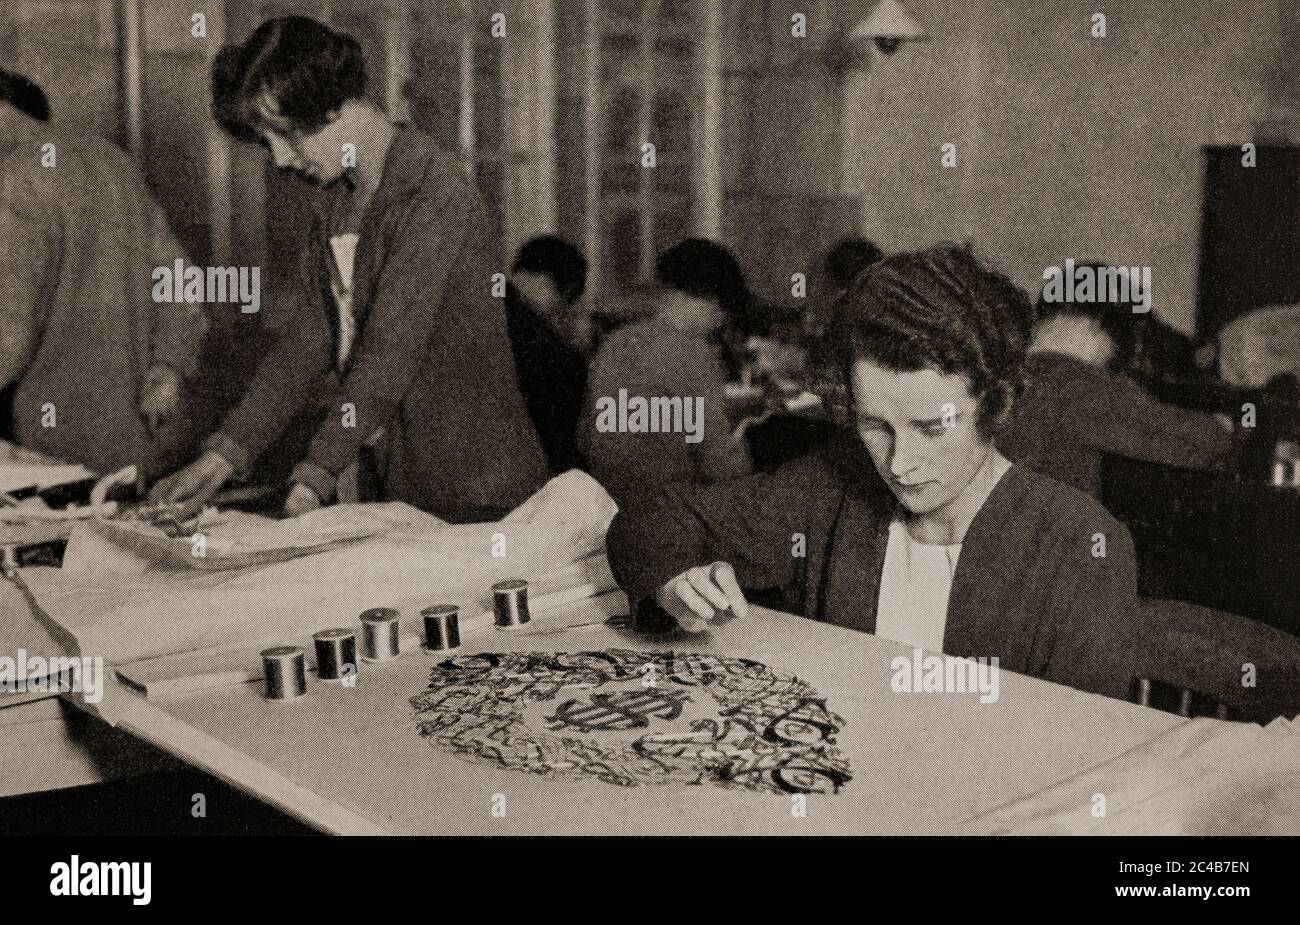 An early 1920's scene in which a young woman used silver, gold and coloured threads to embroider ancient Celtic designs on an altar cloth. Originally photographed by Clifton Adams (1890-1934) for 'Ireland: The Rock Whence I Was Hewn', a National Geographic Magazine feature from March 1927. Stock Photo